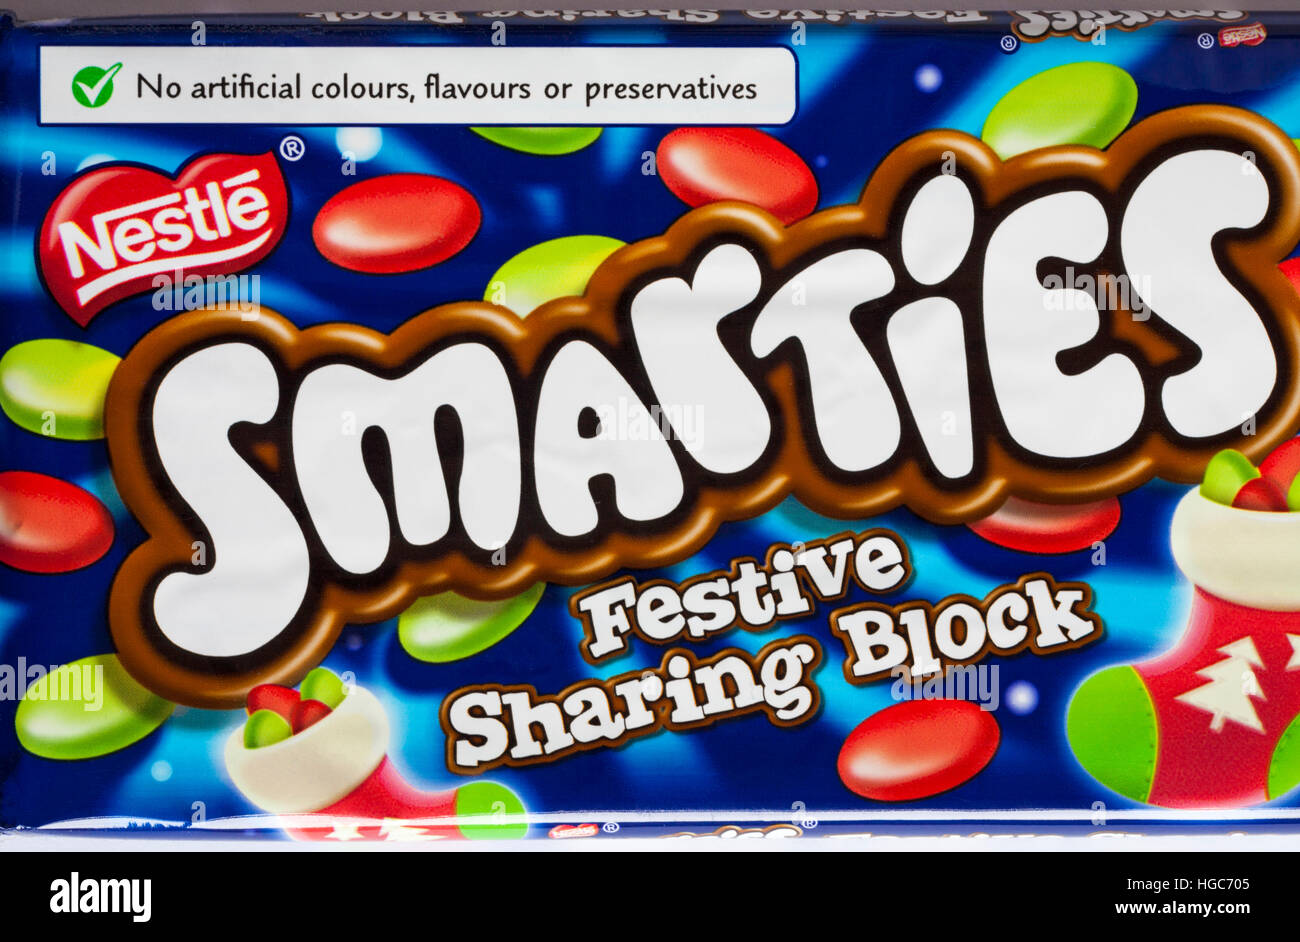 no artificial colours flavours or preservatives - detail on bar of Nestle Smarties Festive Sharing Block of chocolate Stock Photo